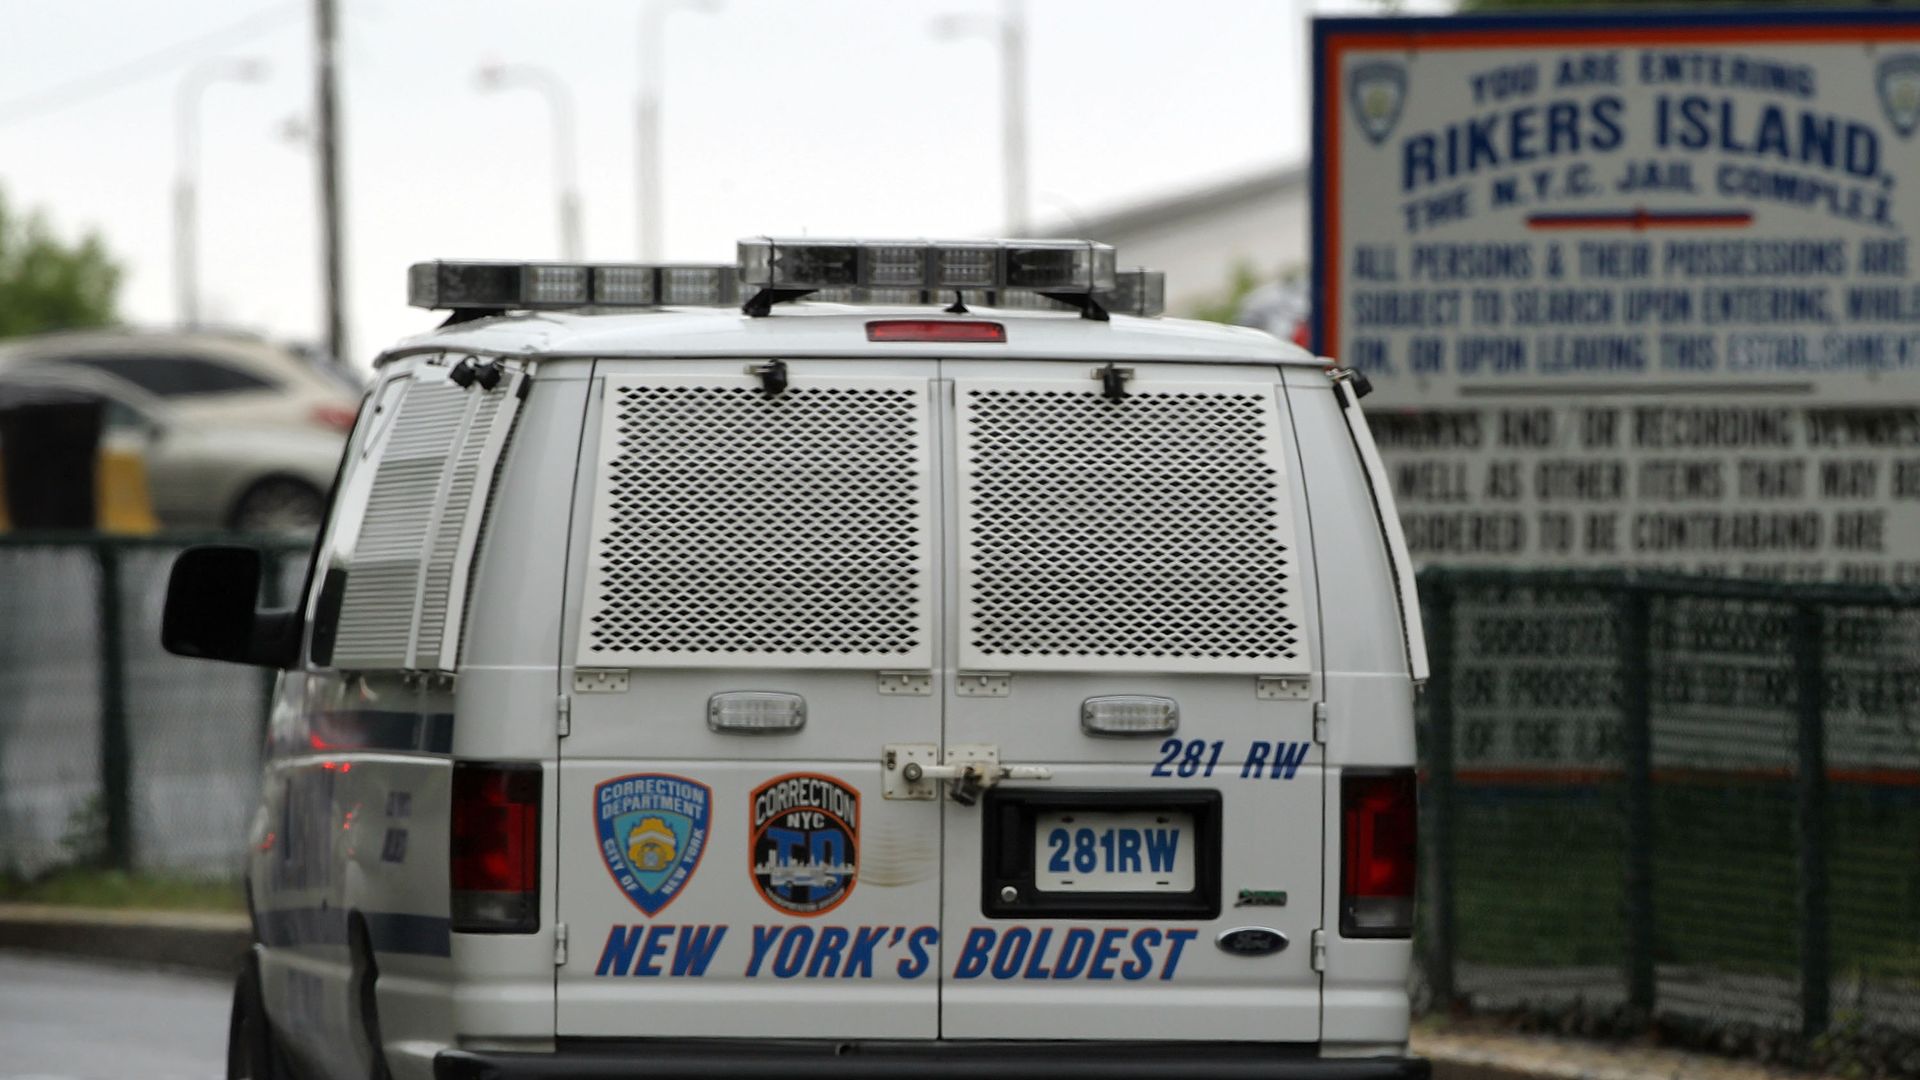 Entrance of the Rikers Island prison complex in New York City. Photo: Spencer Platt/Getty Images